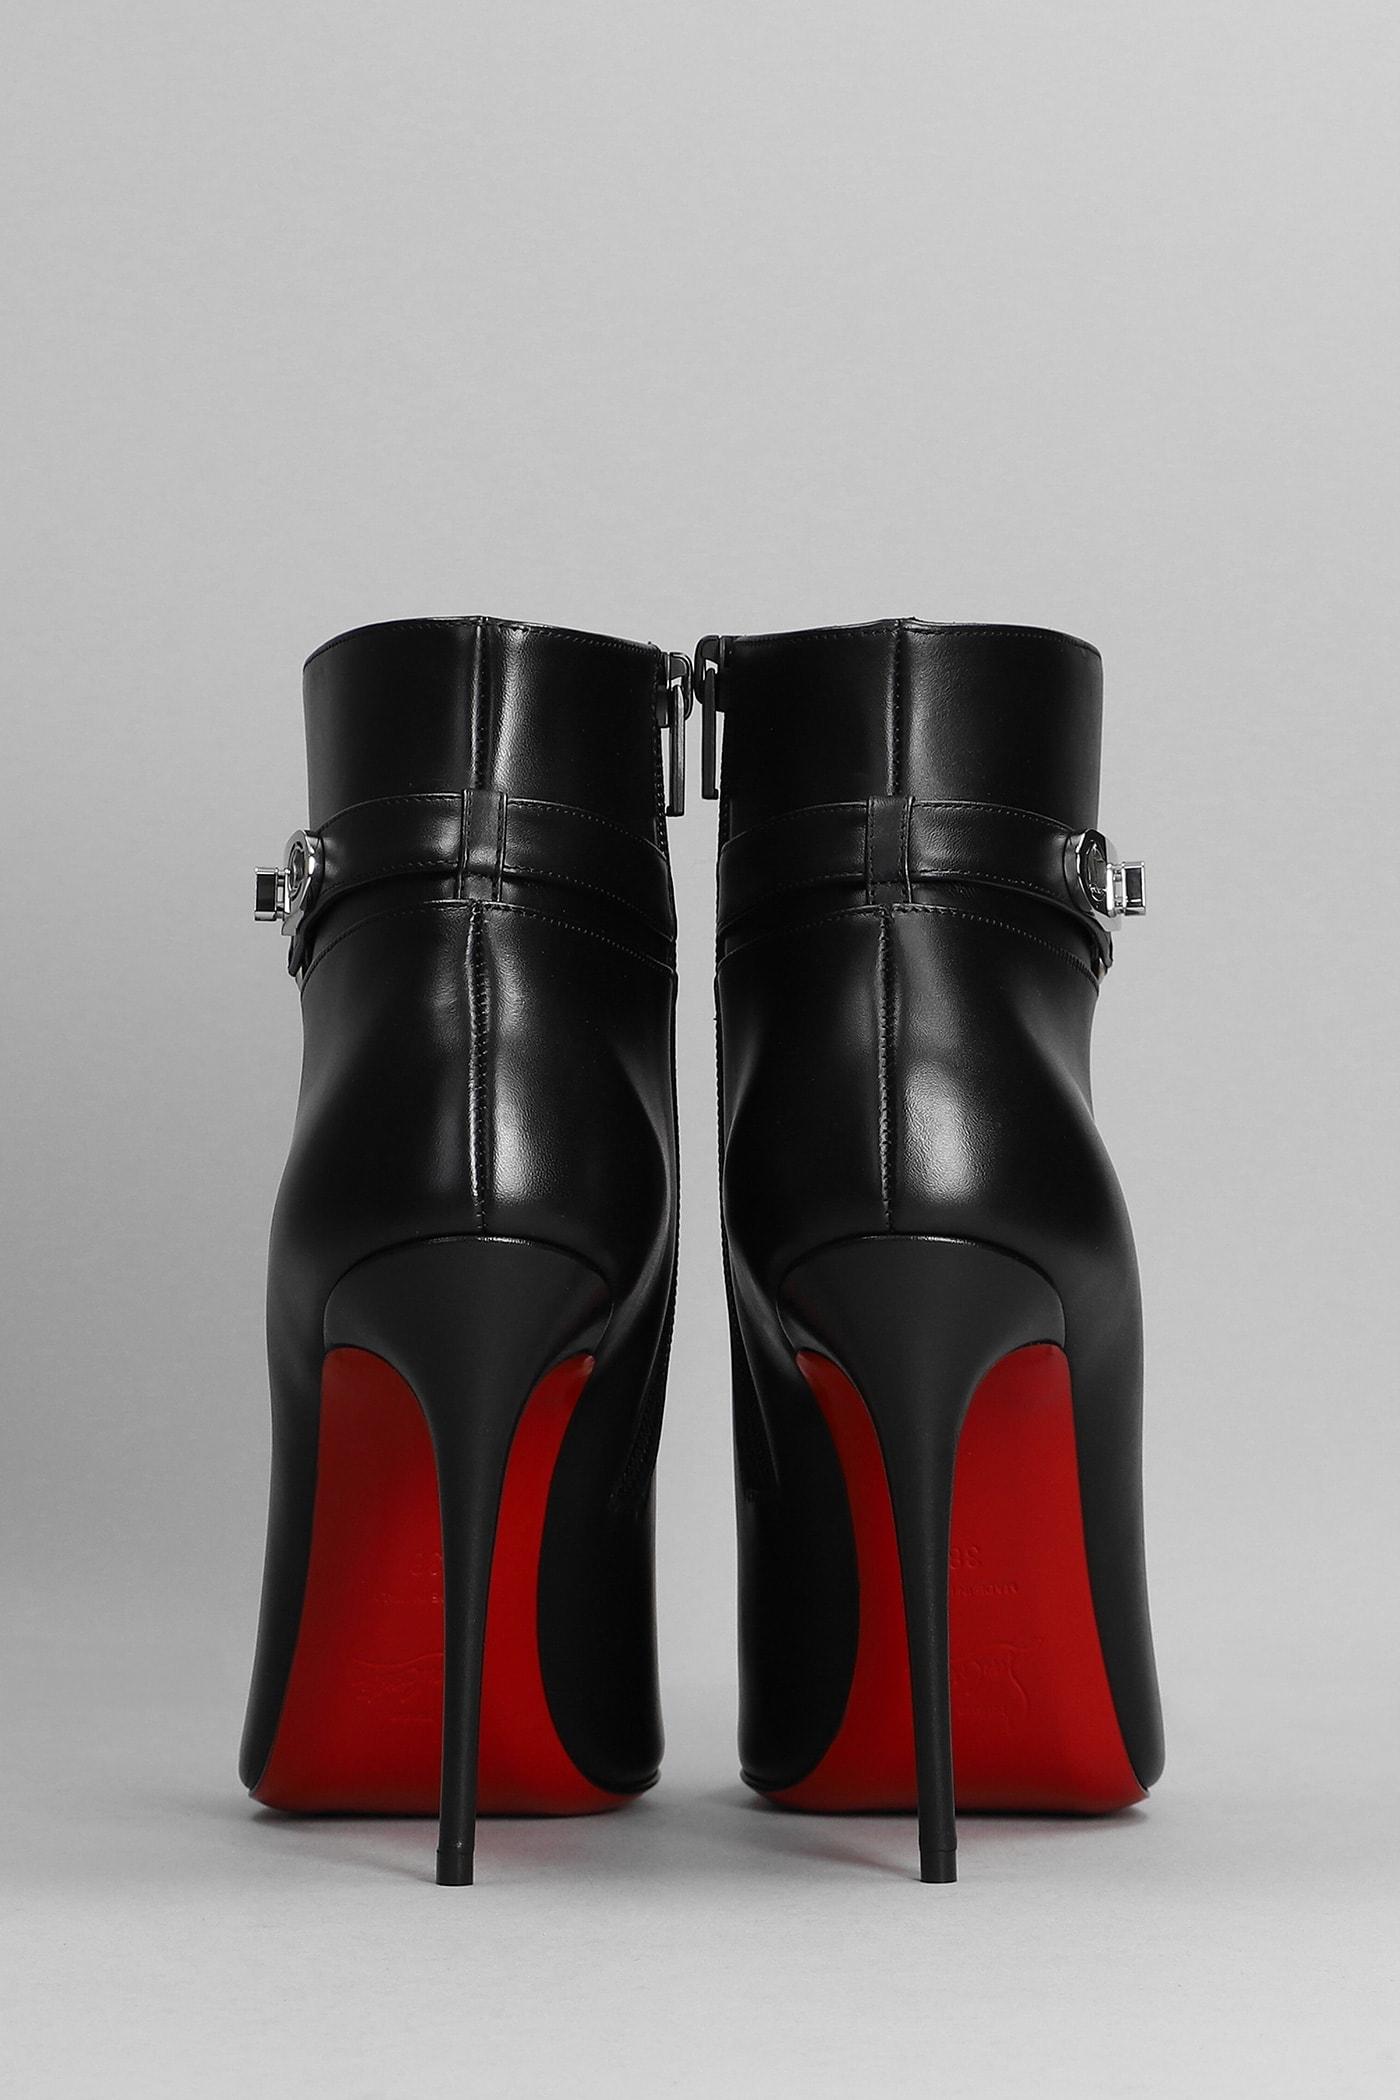 Lock So Kate Ankle Boots in Black - Christian Louboutin